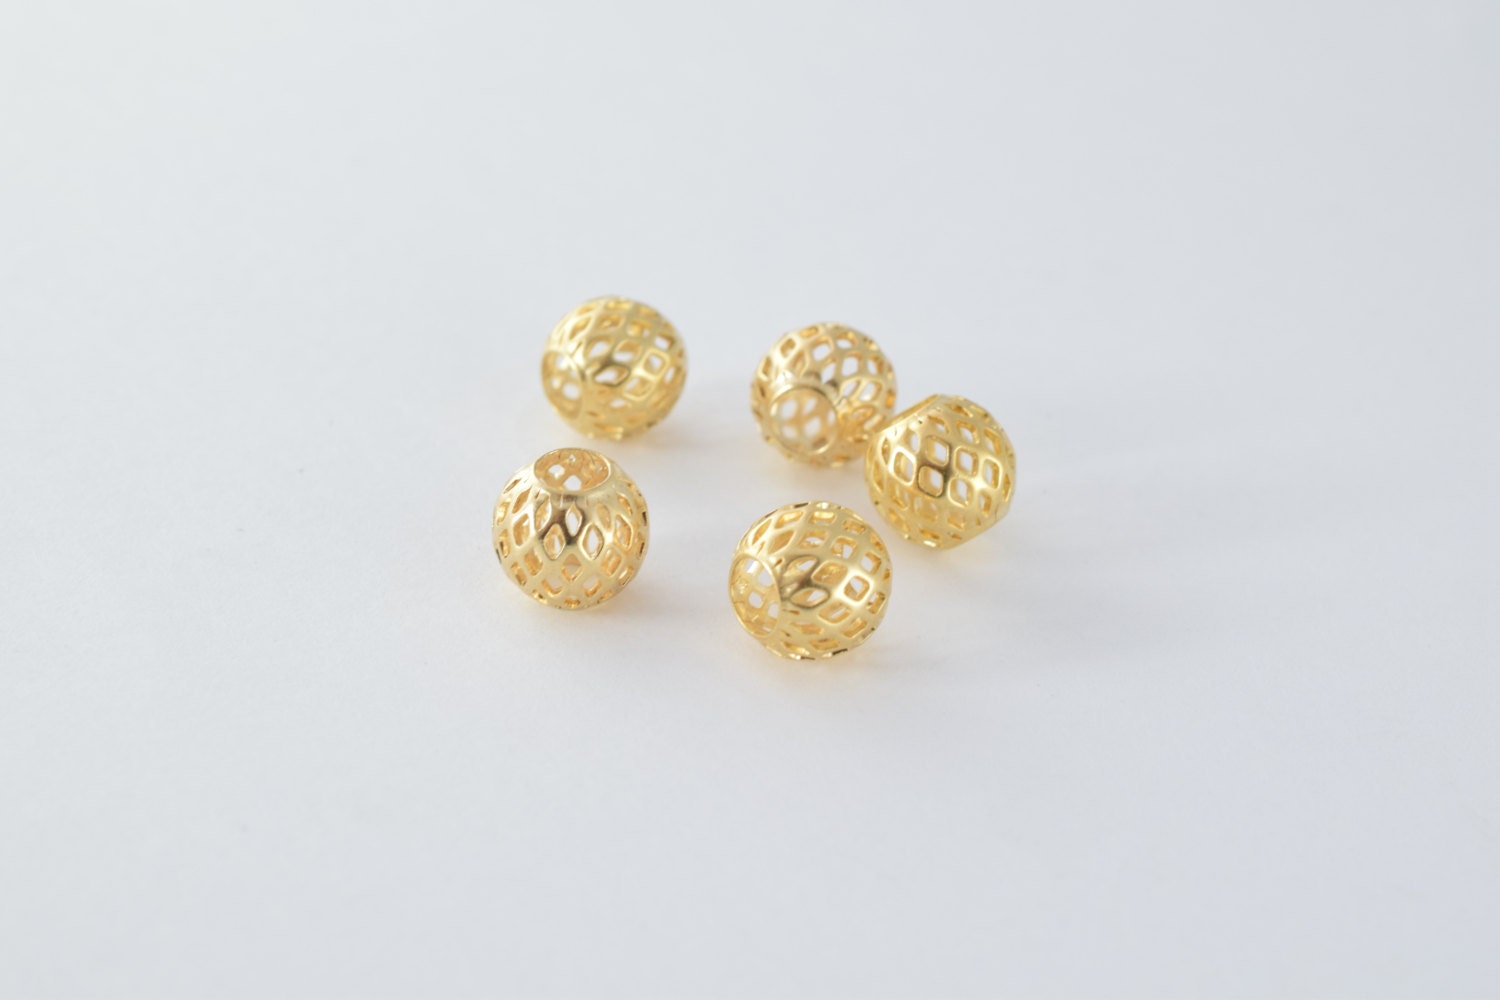 Beaded Jewelry 10mm Gold Filled EP Diamond Cut Round Ball 10mm Bead Hole Size 4mm GF3366 18KGF